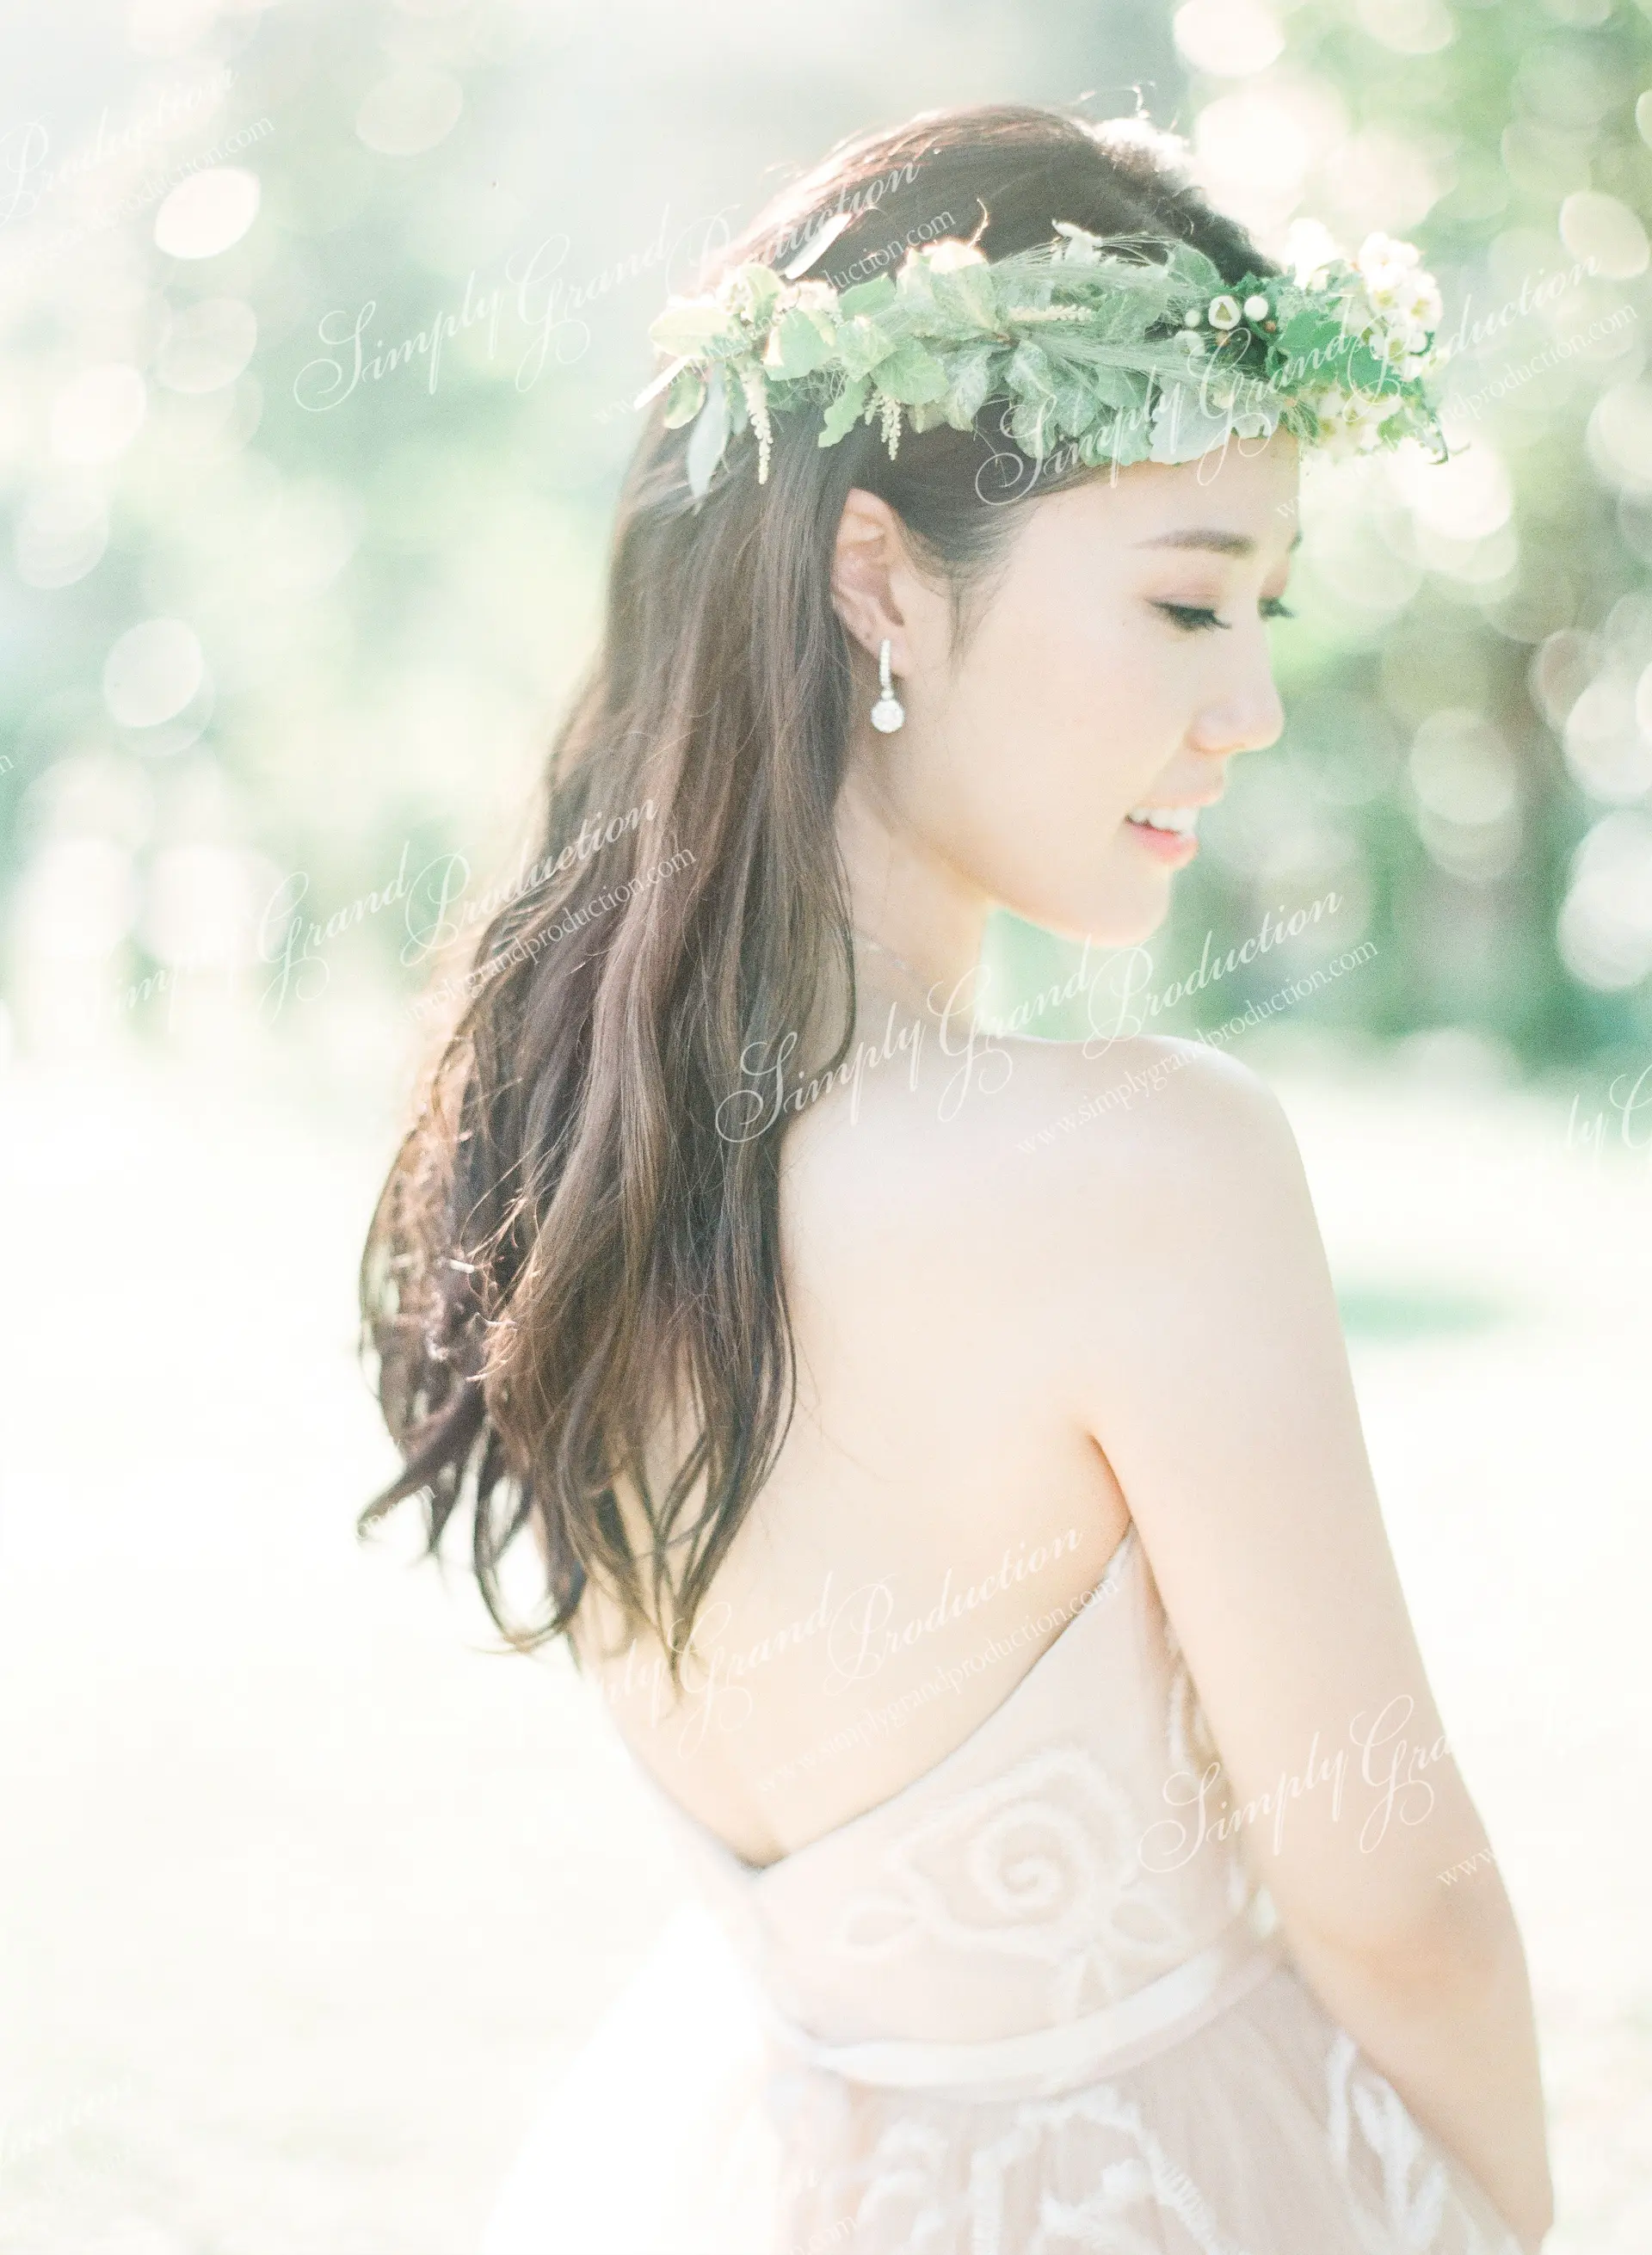 Simply_Grand_Production_Outdoor_wedding_decoration_photoshoot_Adventist_College_bridal_floral_crown_2_9.JPG